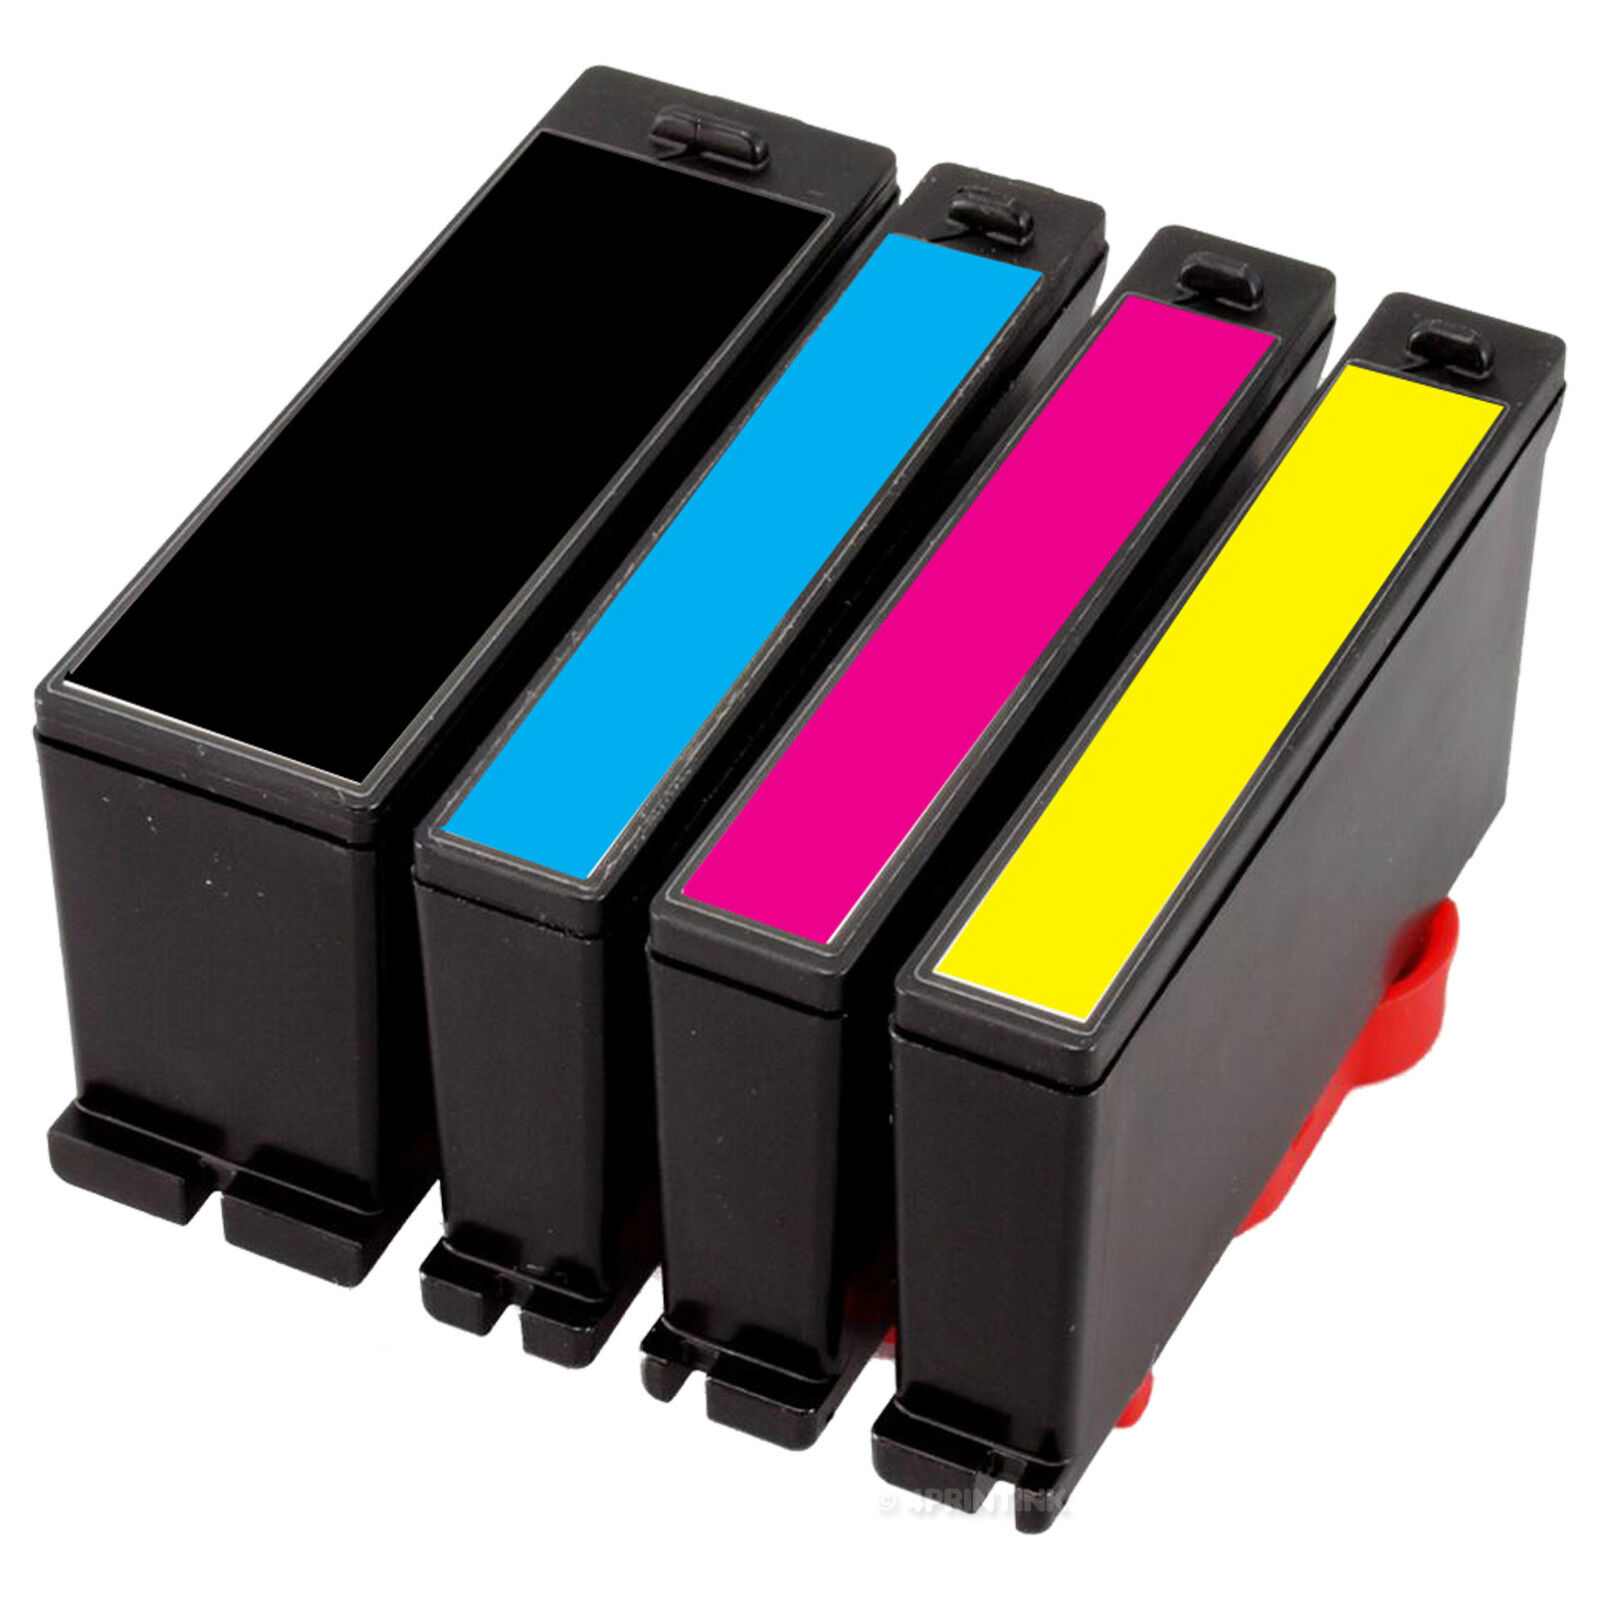 4 pack 100XL High Yield Ink For Lexmark PRO 205 705 805 901 905